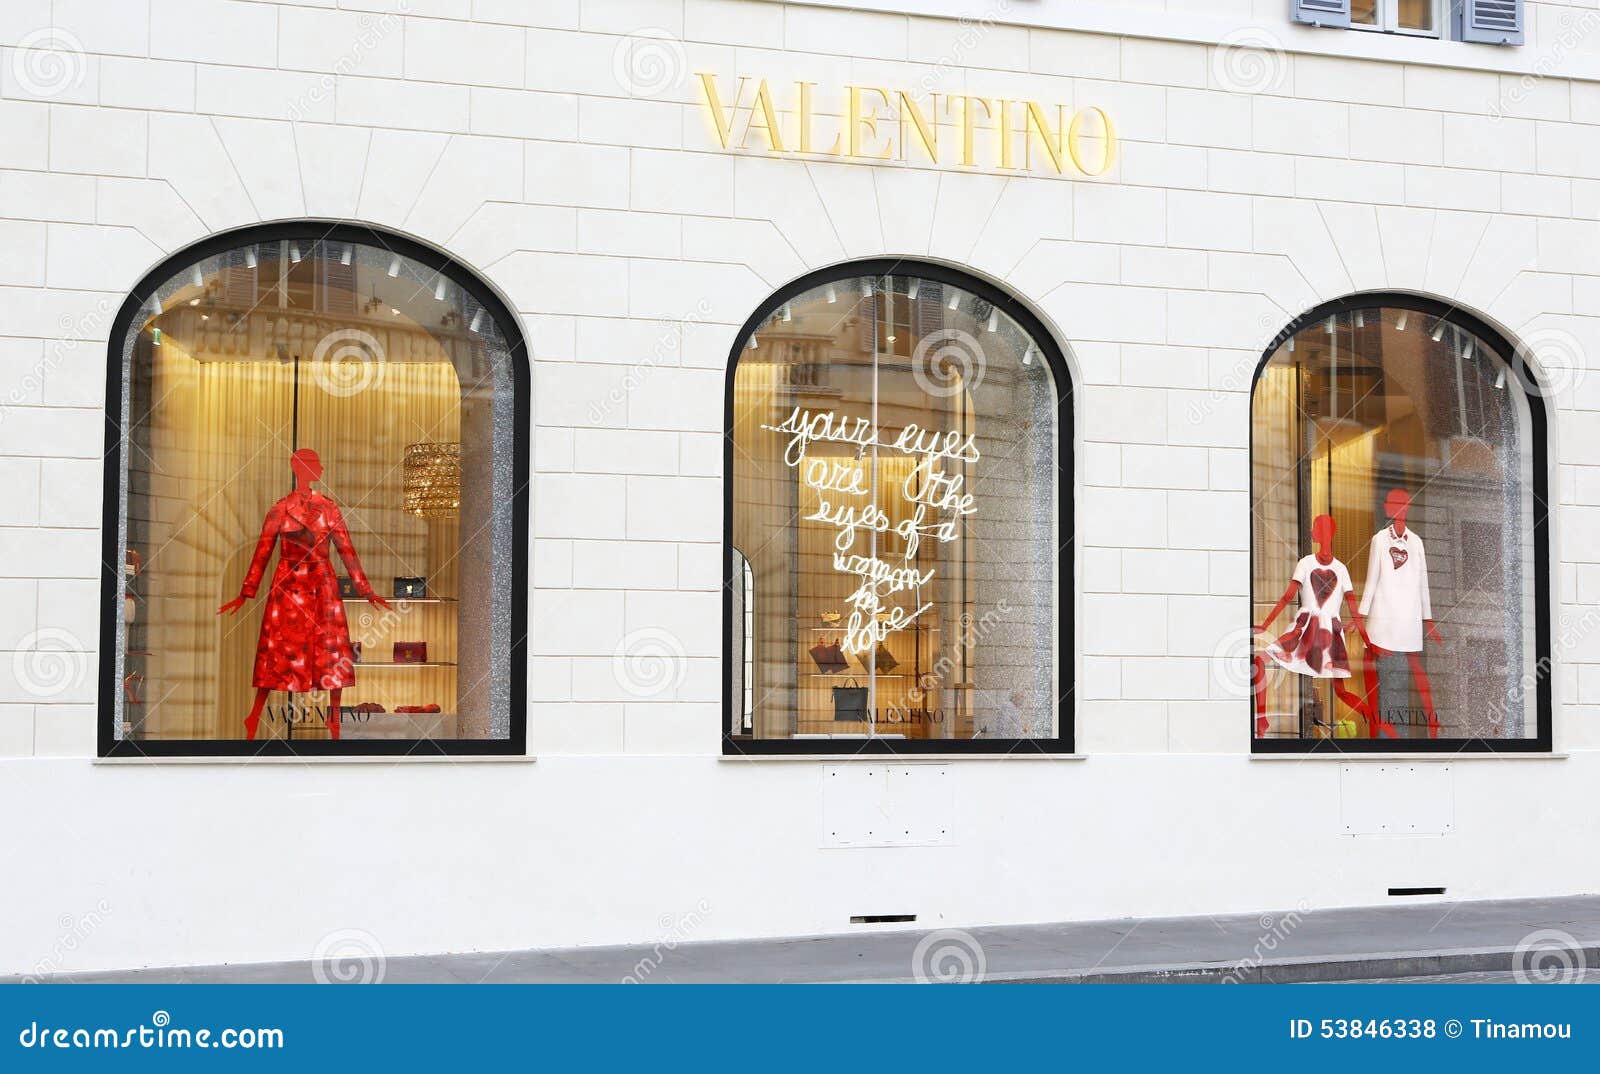 Windows of Valentino Boutique Rome Editorial Stock Photo - Image of italy, shopping: